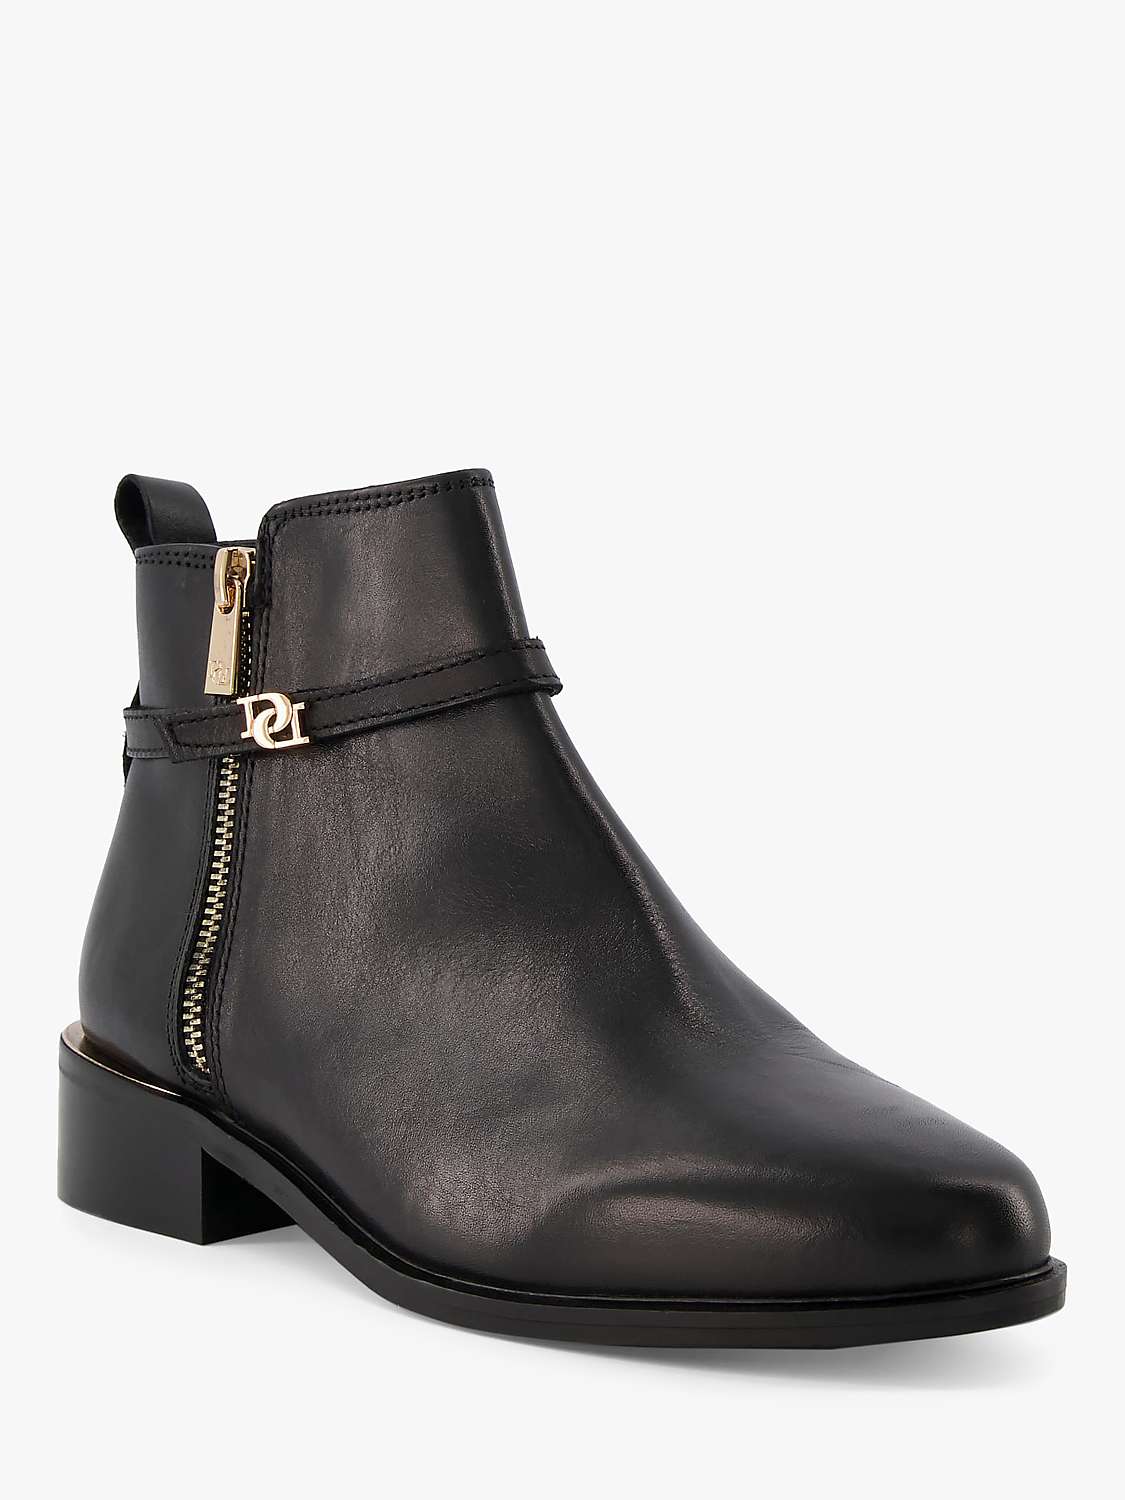 Buy Dune Pap Leather Side Zip Ankle Boots Online at johnlewis.com